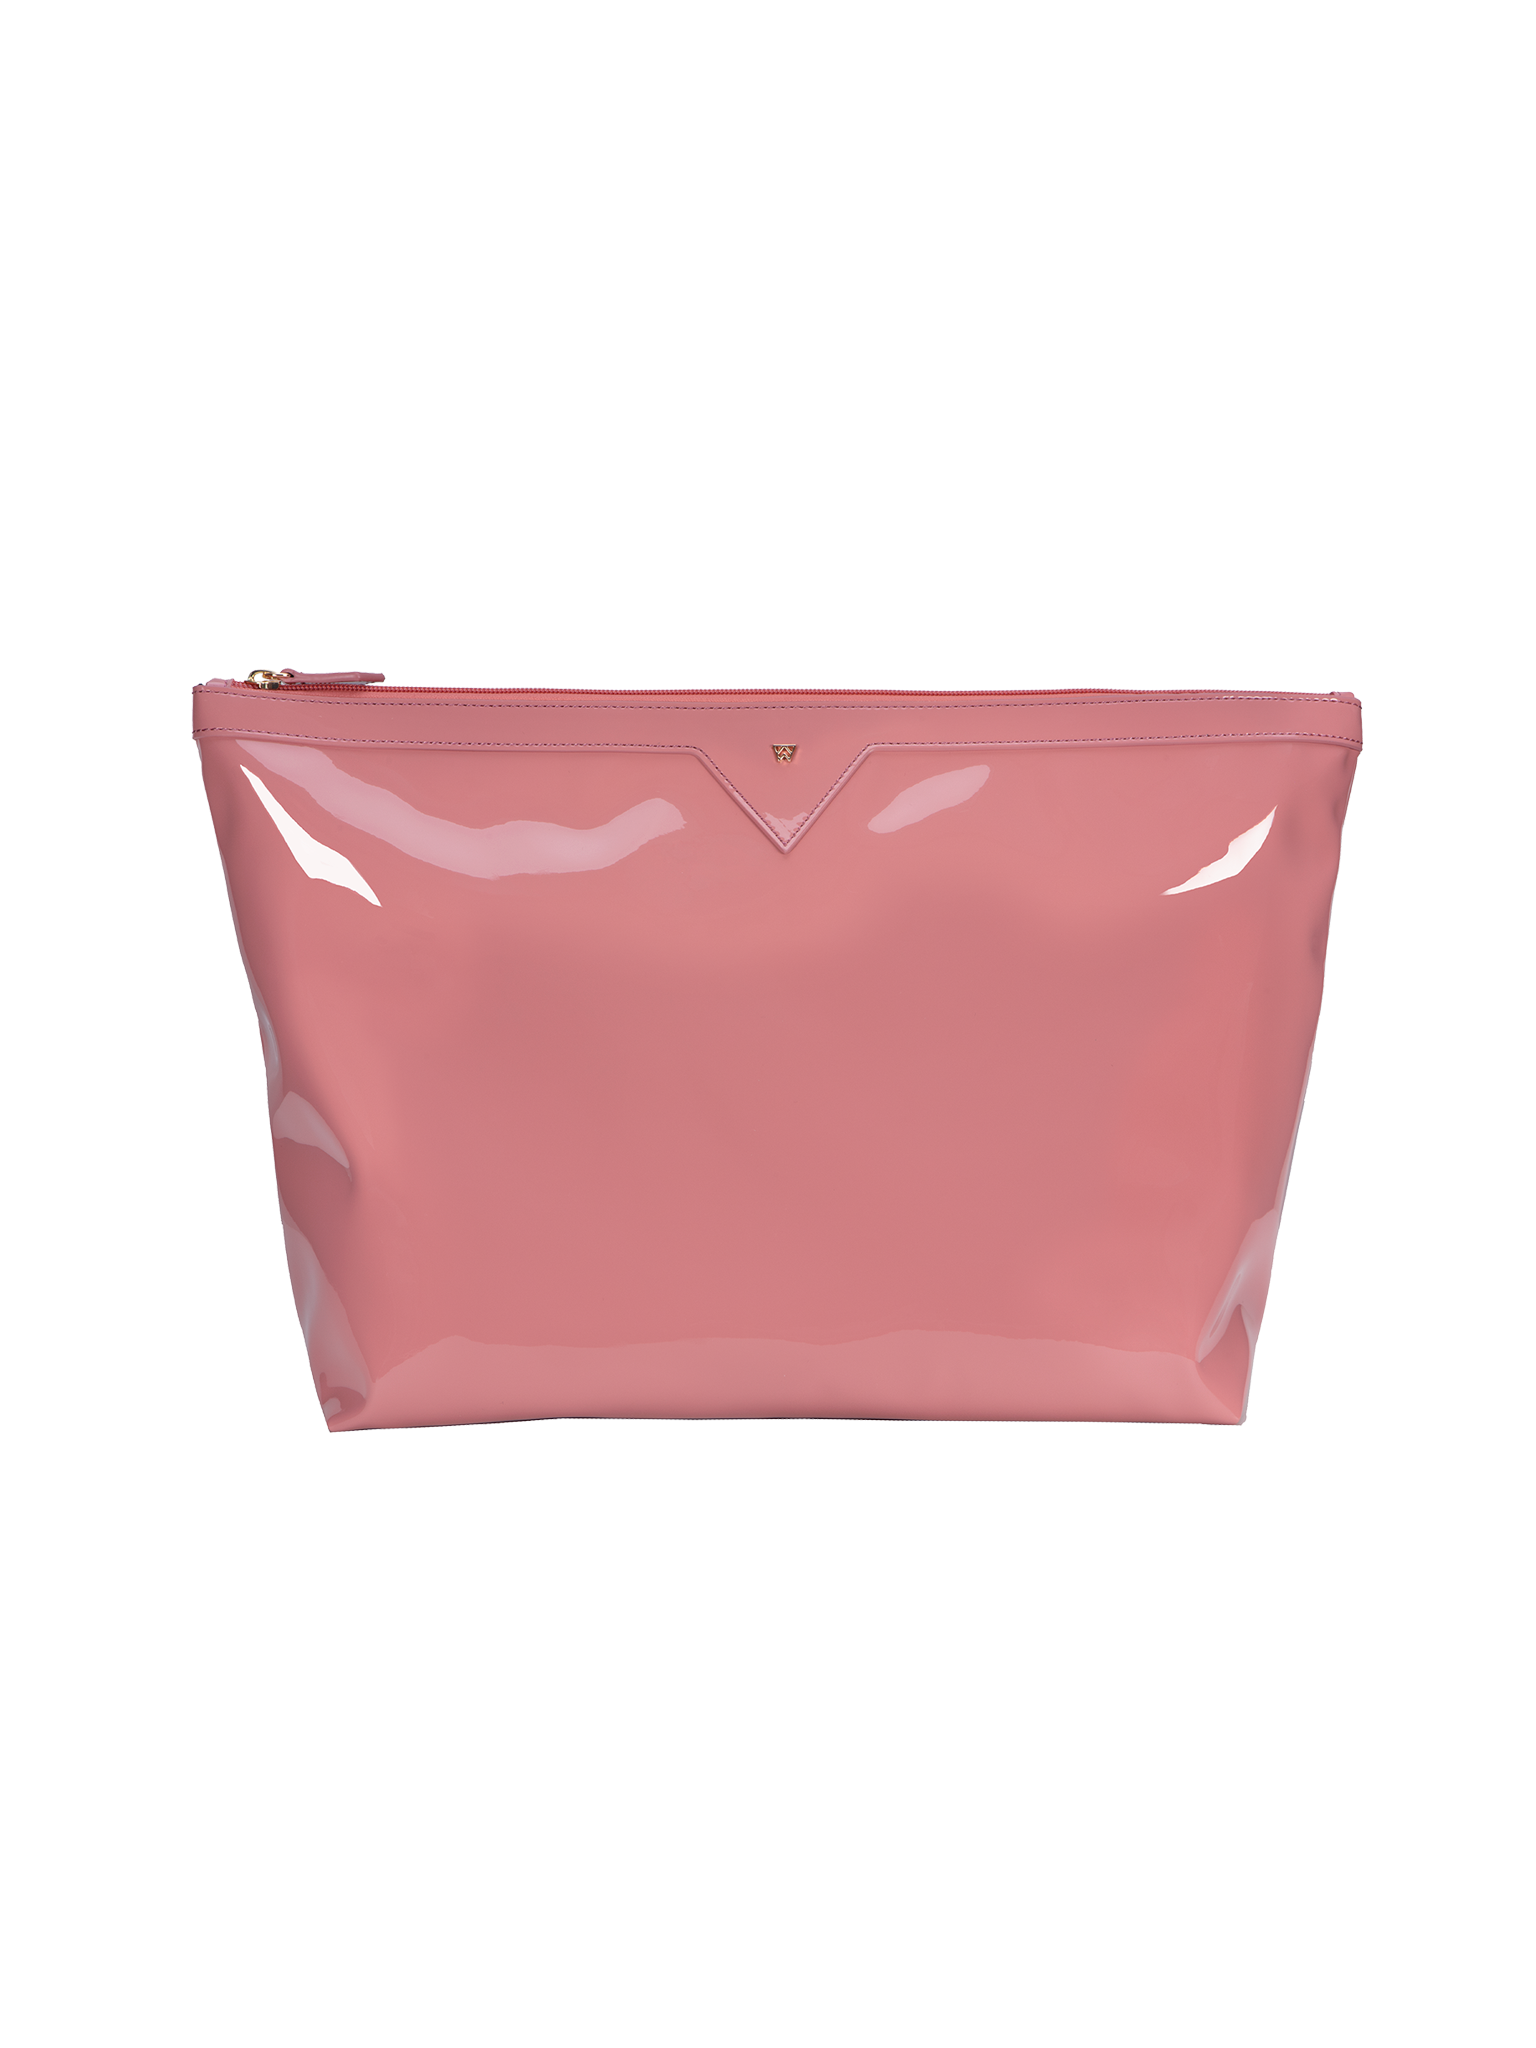 Keep your precious belongings cool and protected with our removable, zipper closed, interior pouch in rose 